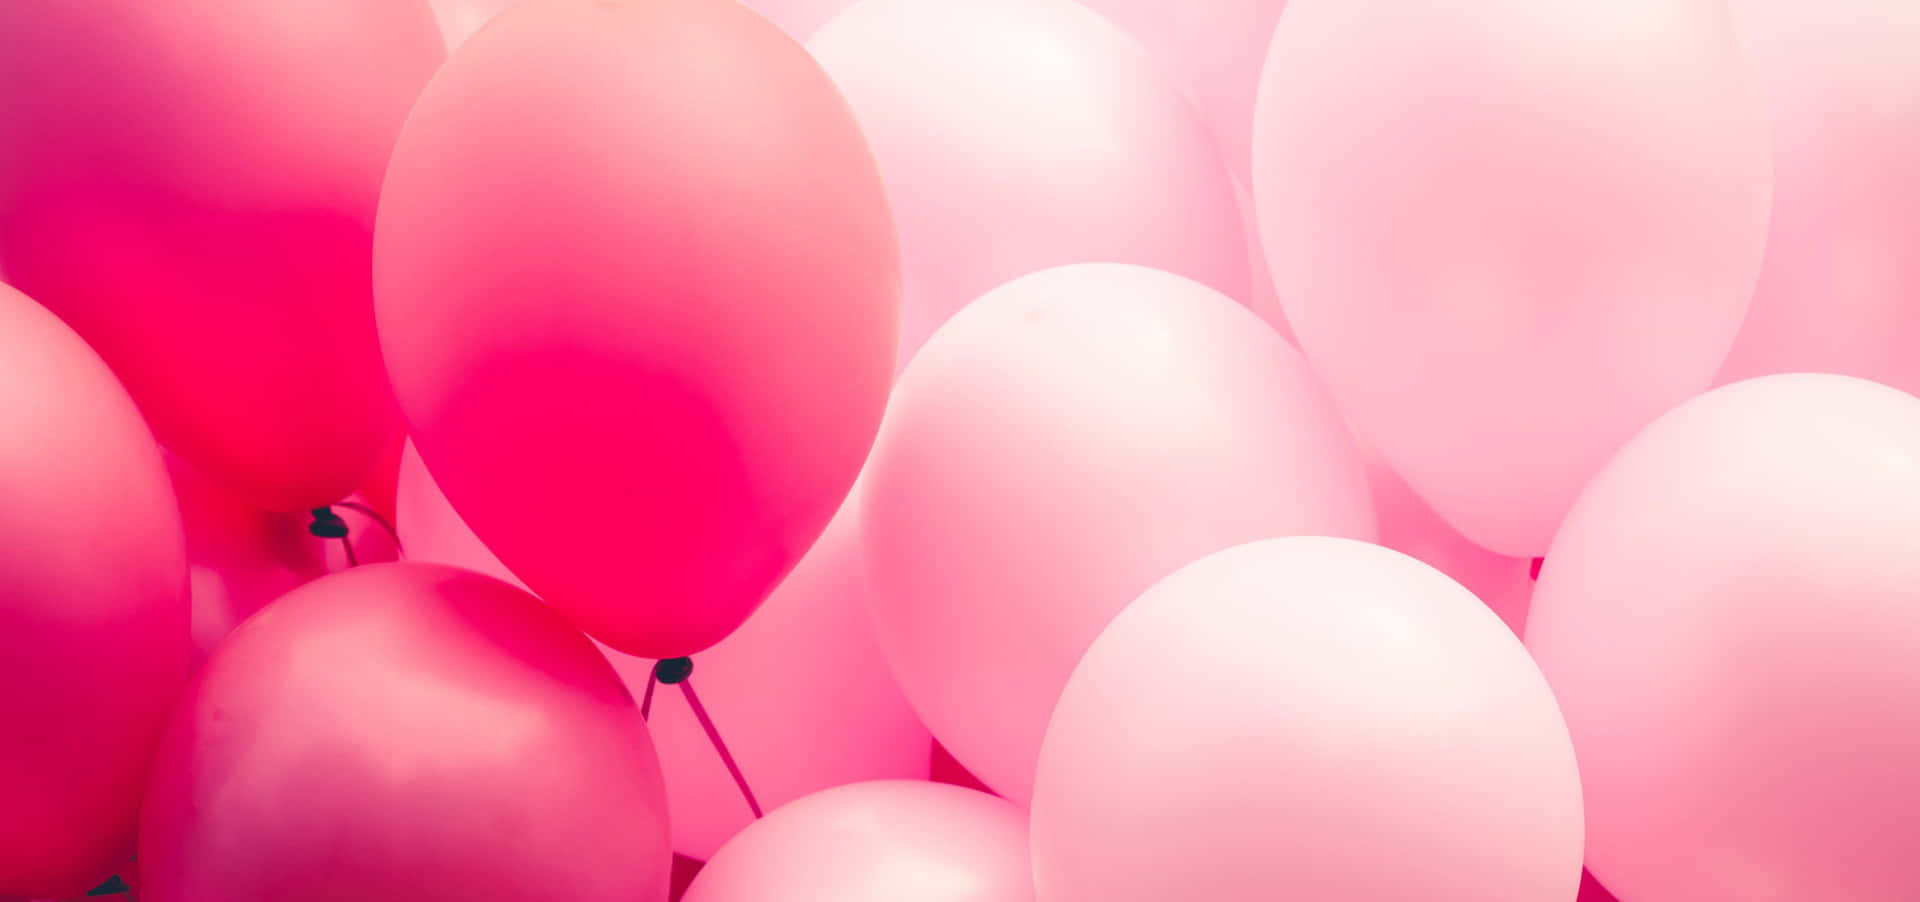 Let your dreams soar with floating pink balloons!